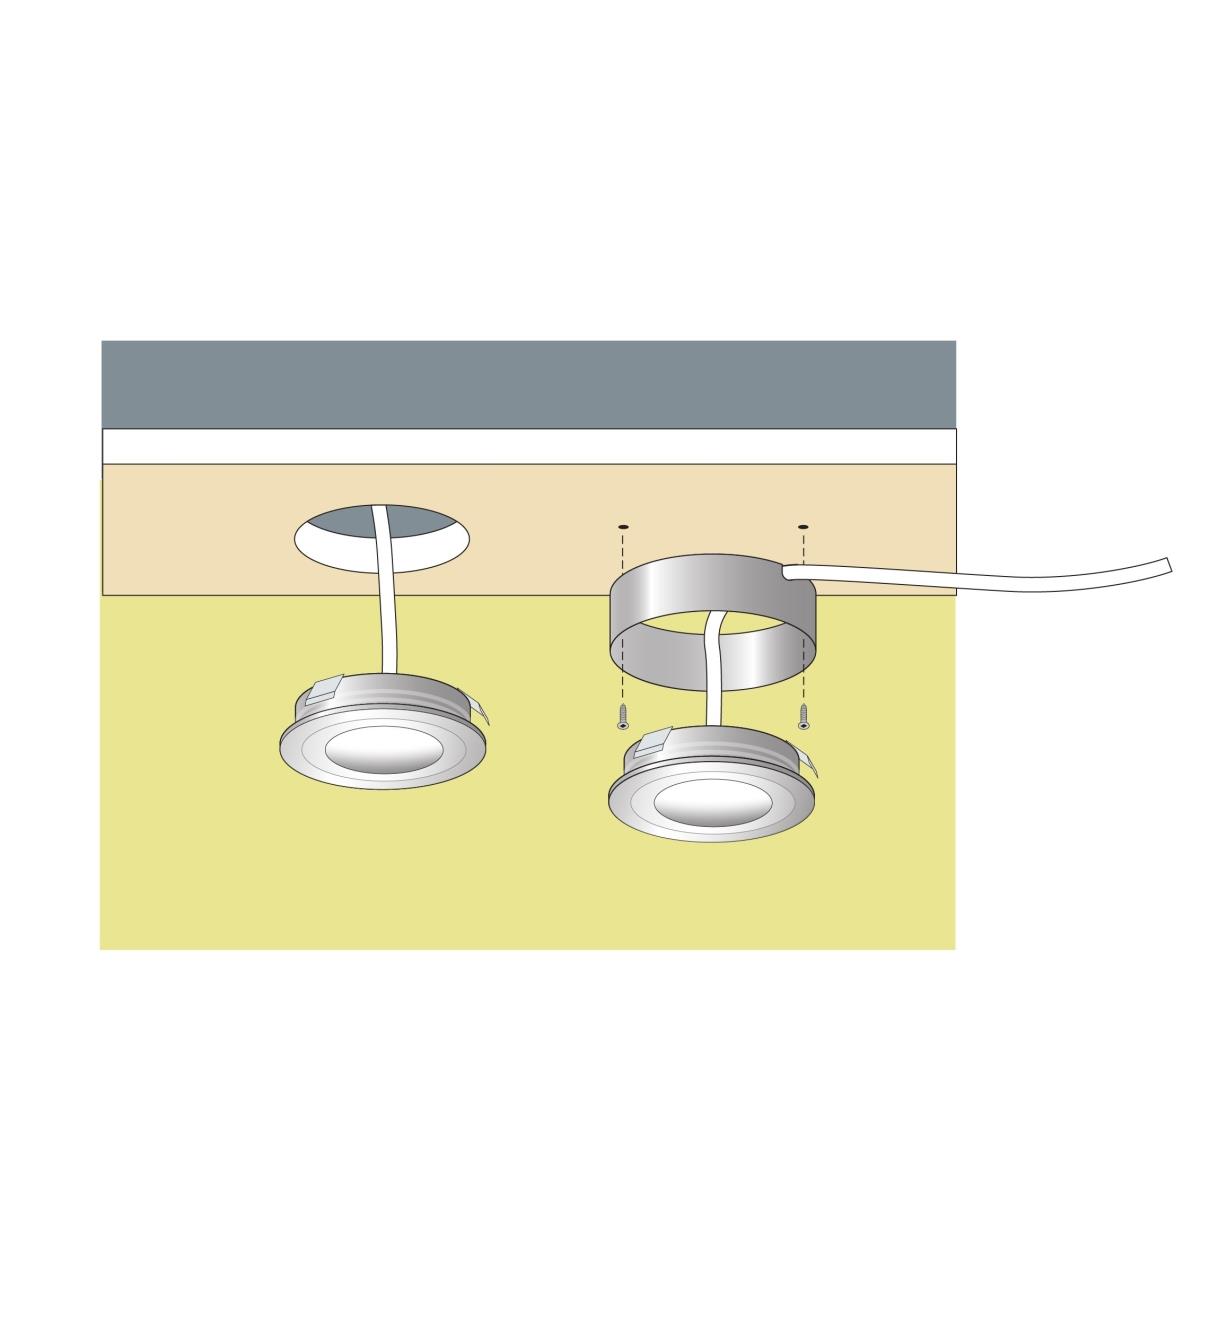 Illustration of LED Downlights being installed in inset and surface-mount applications